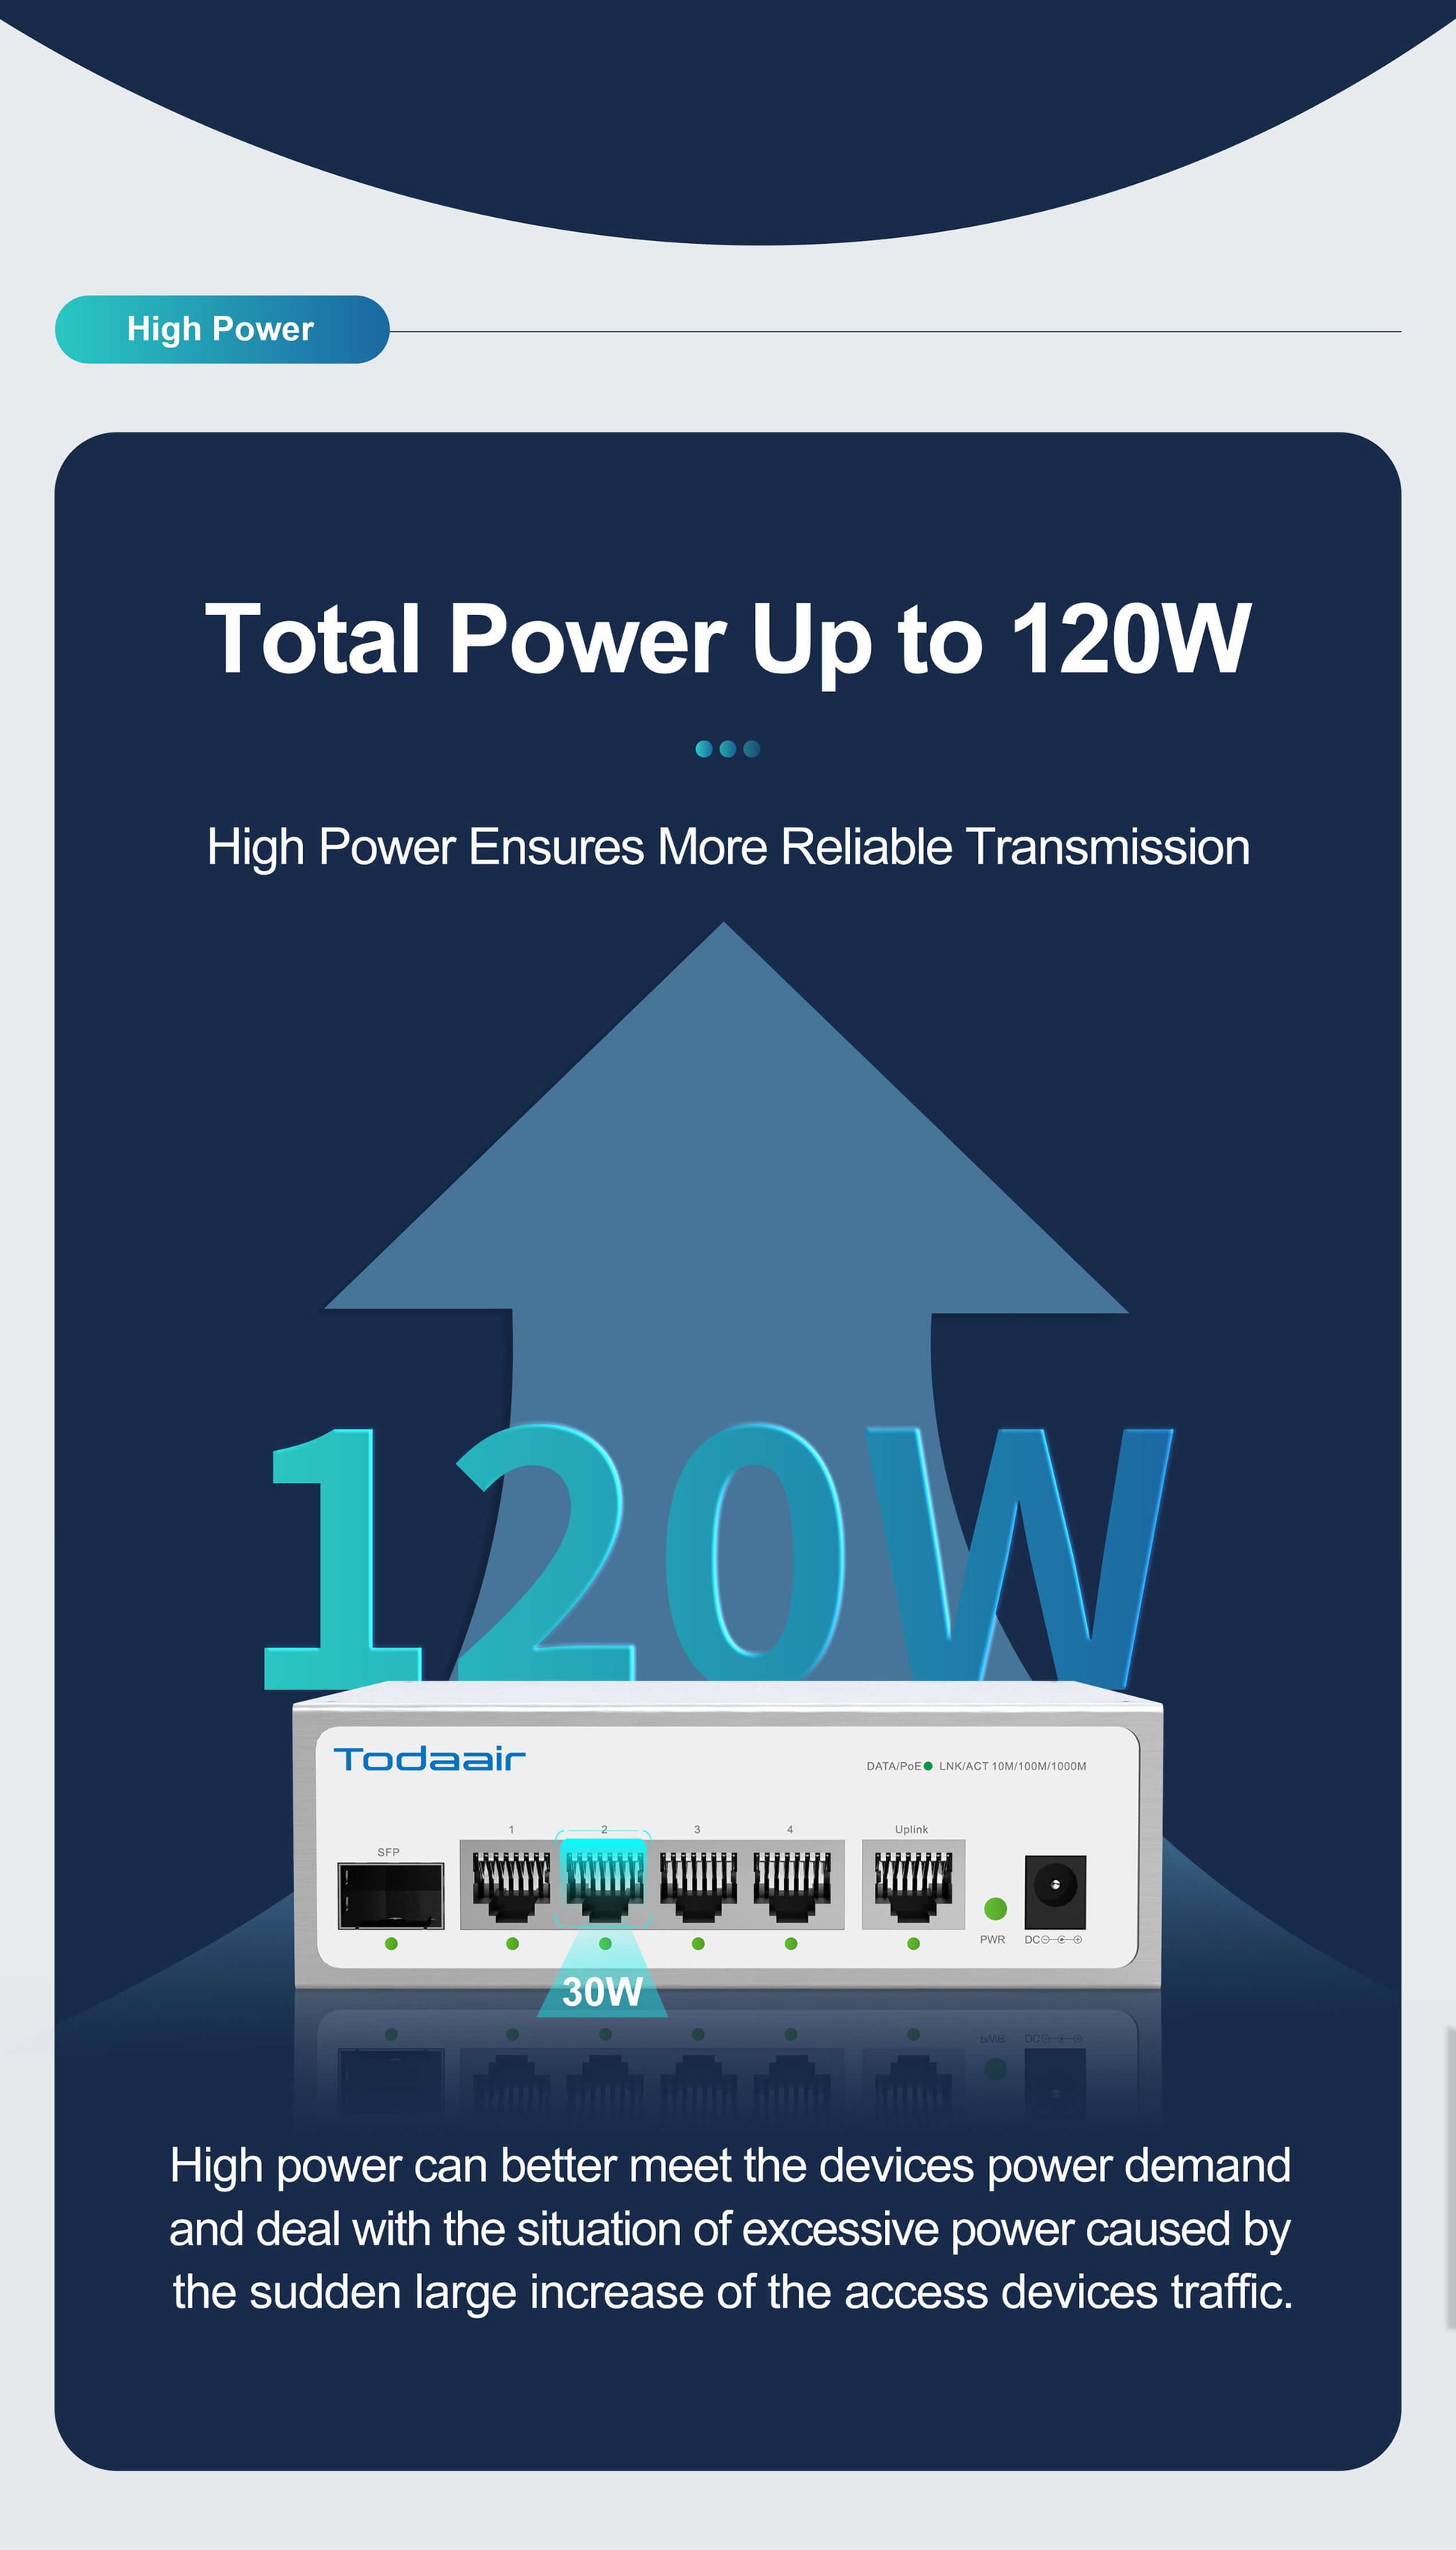 total power up to 120W. High power ensure more reliable transmission